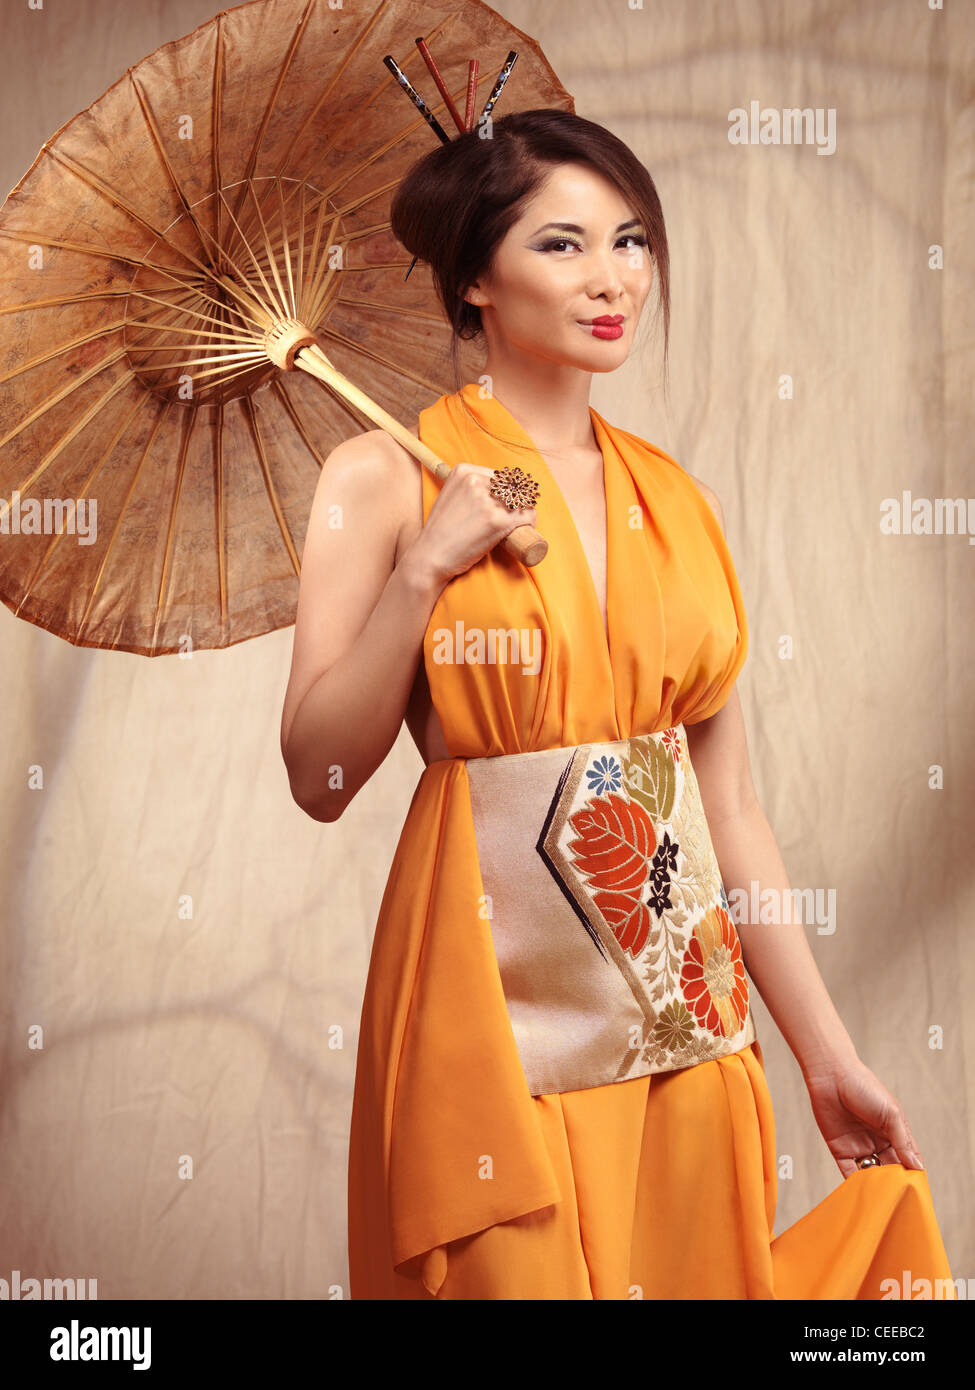 Beautiful asian woman wearing an orange dress stading with an umbrella in her hand Stock Photo